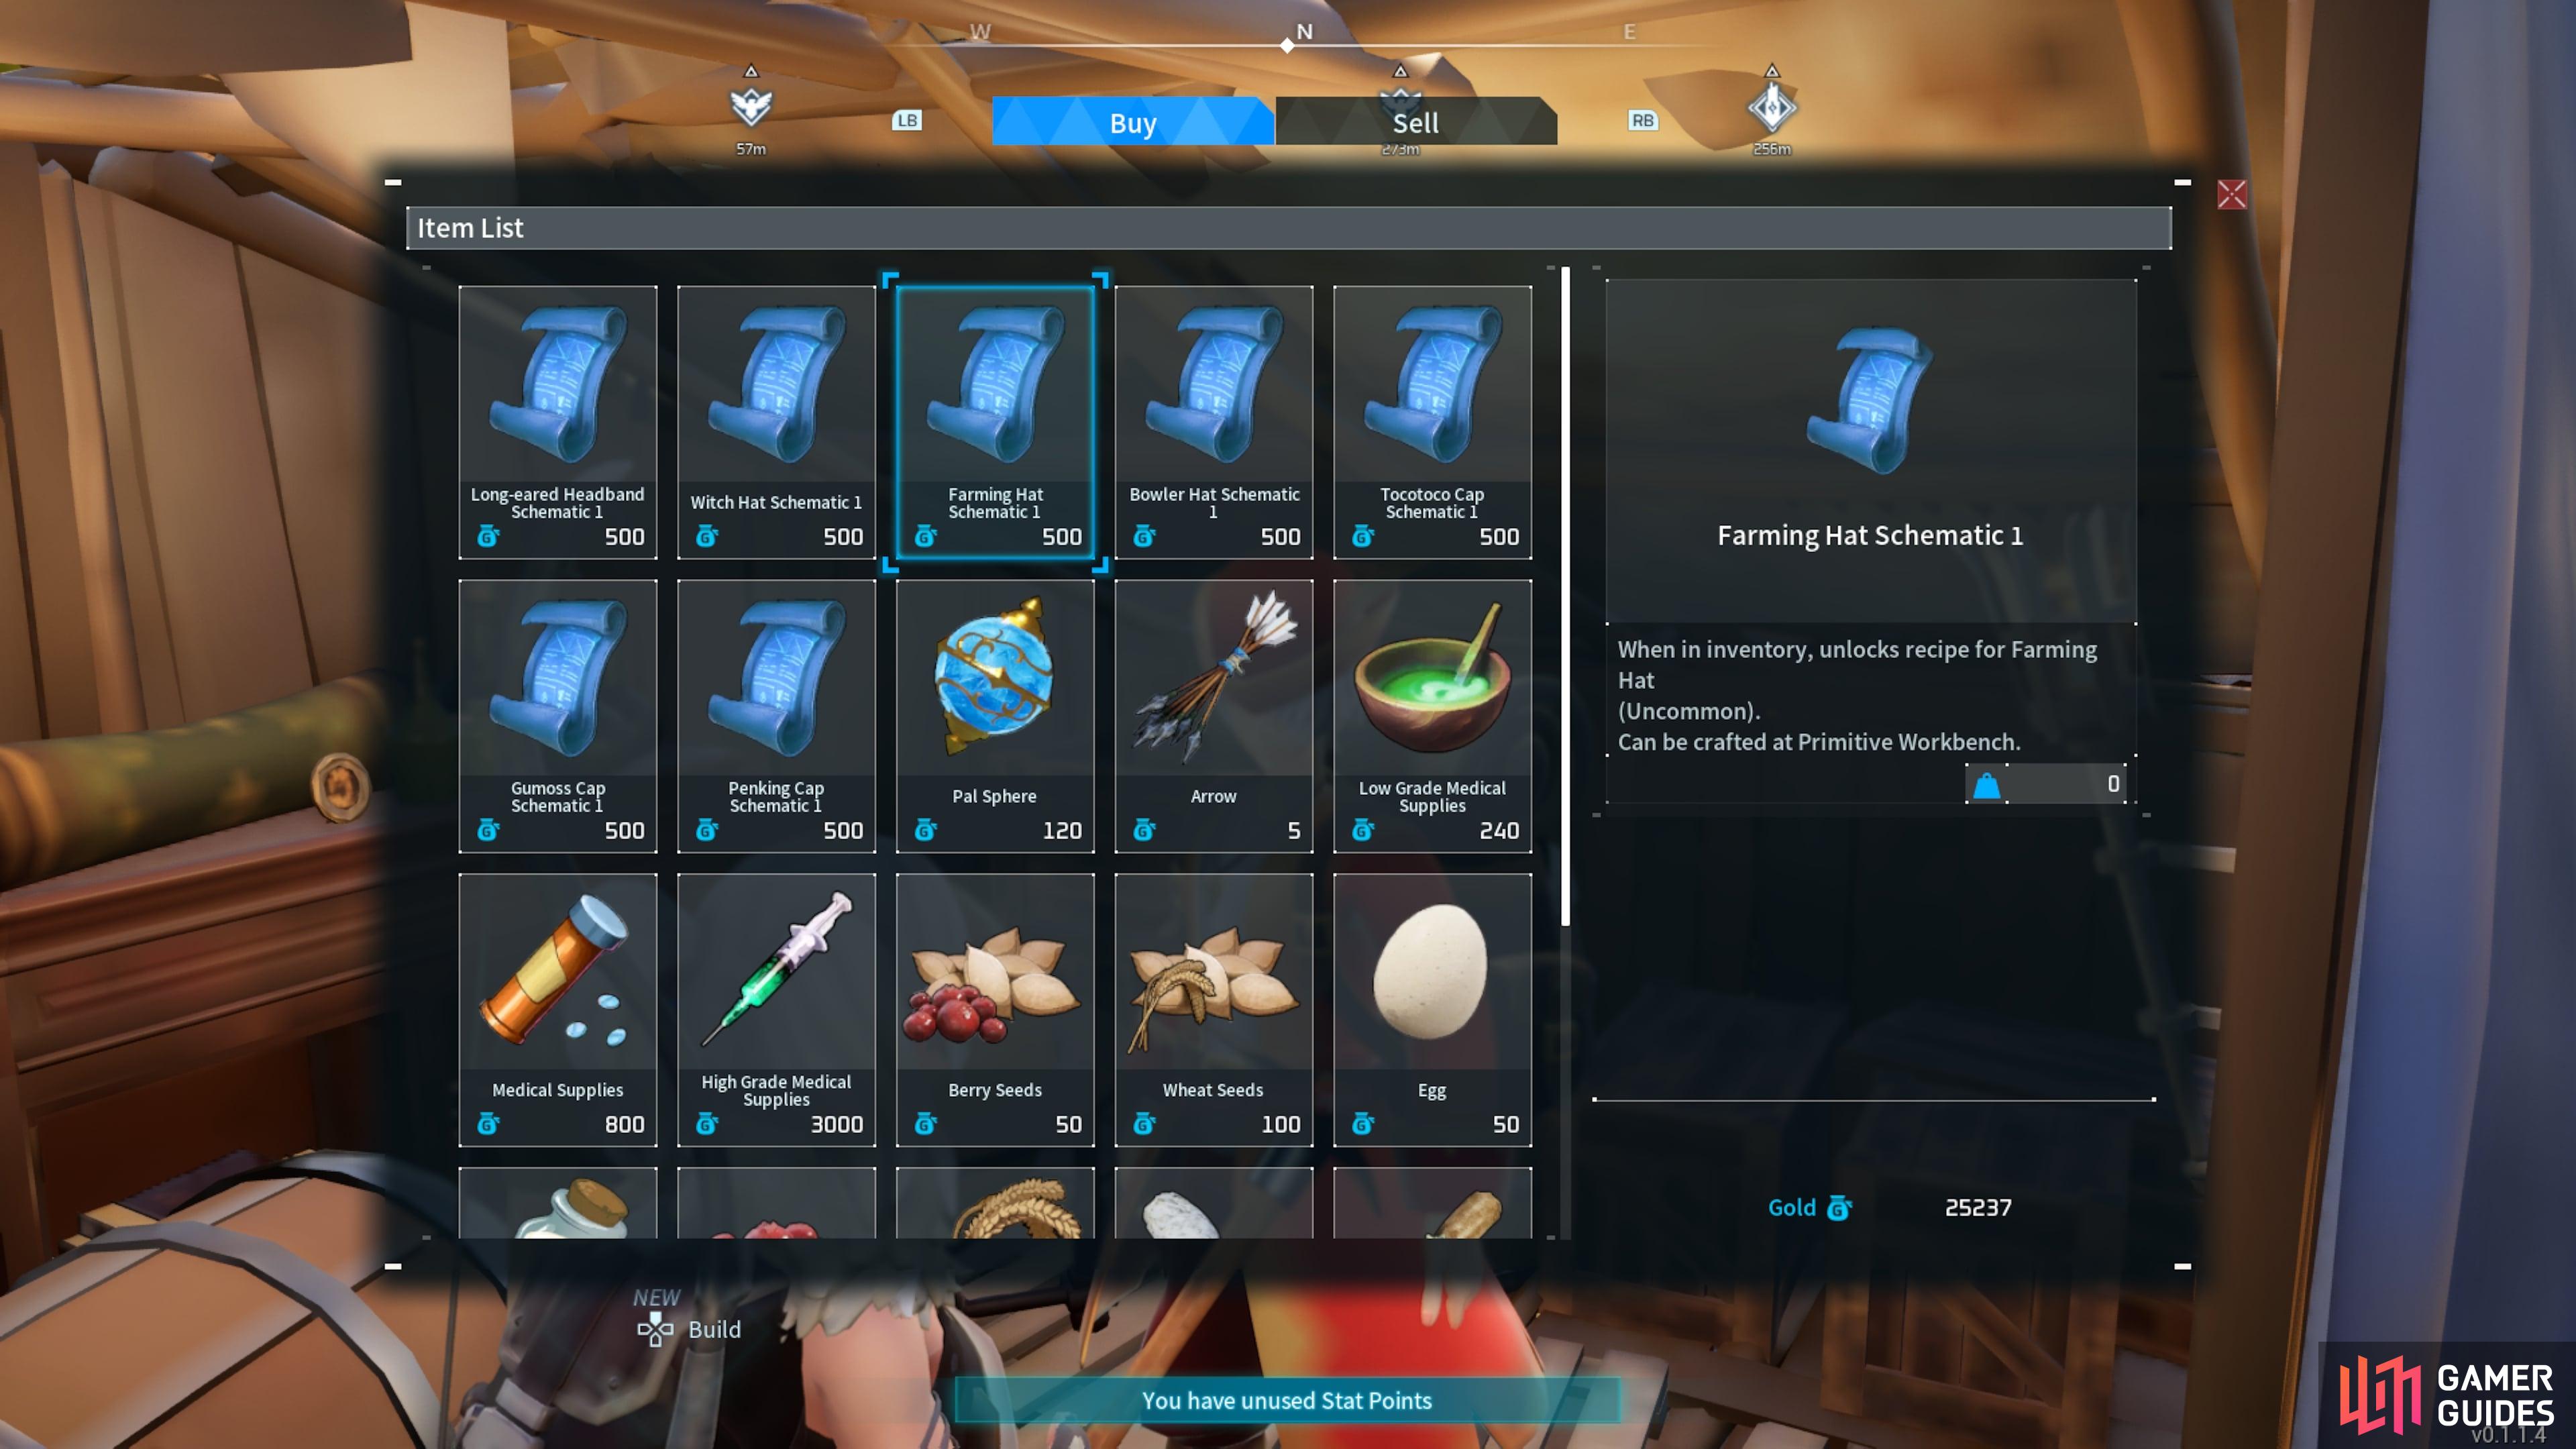 Merchants offer several different items for players to choose from.